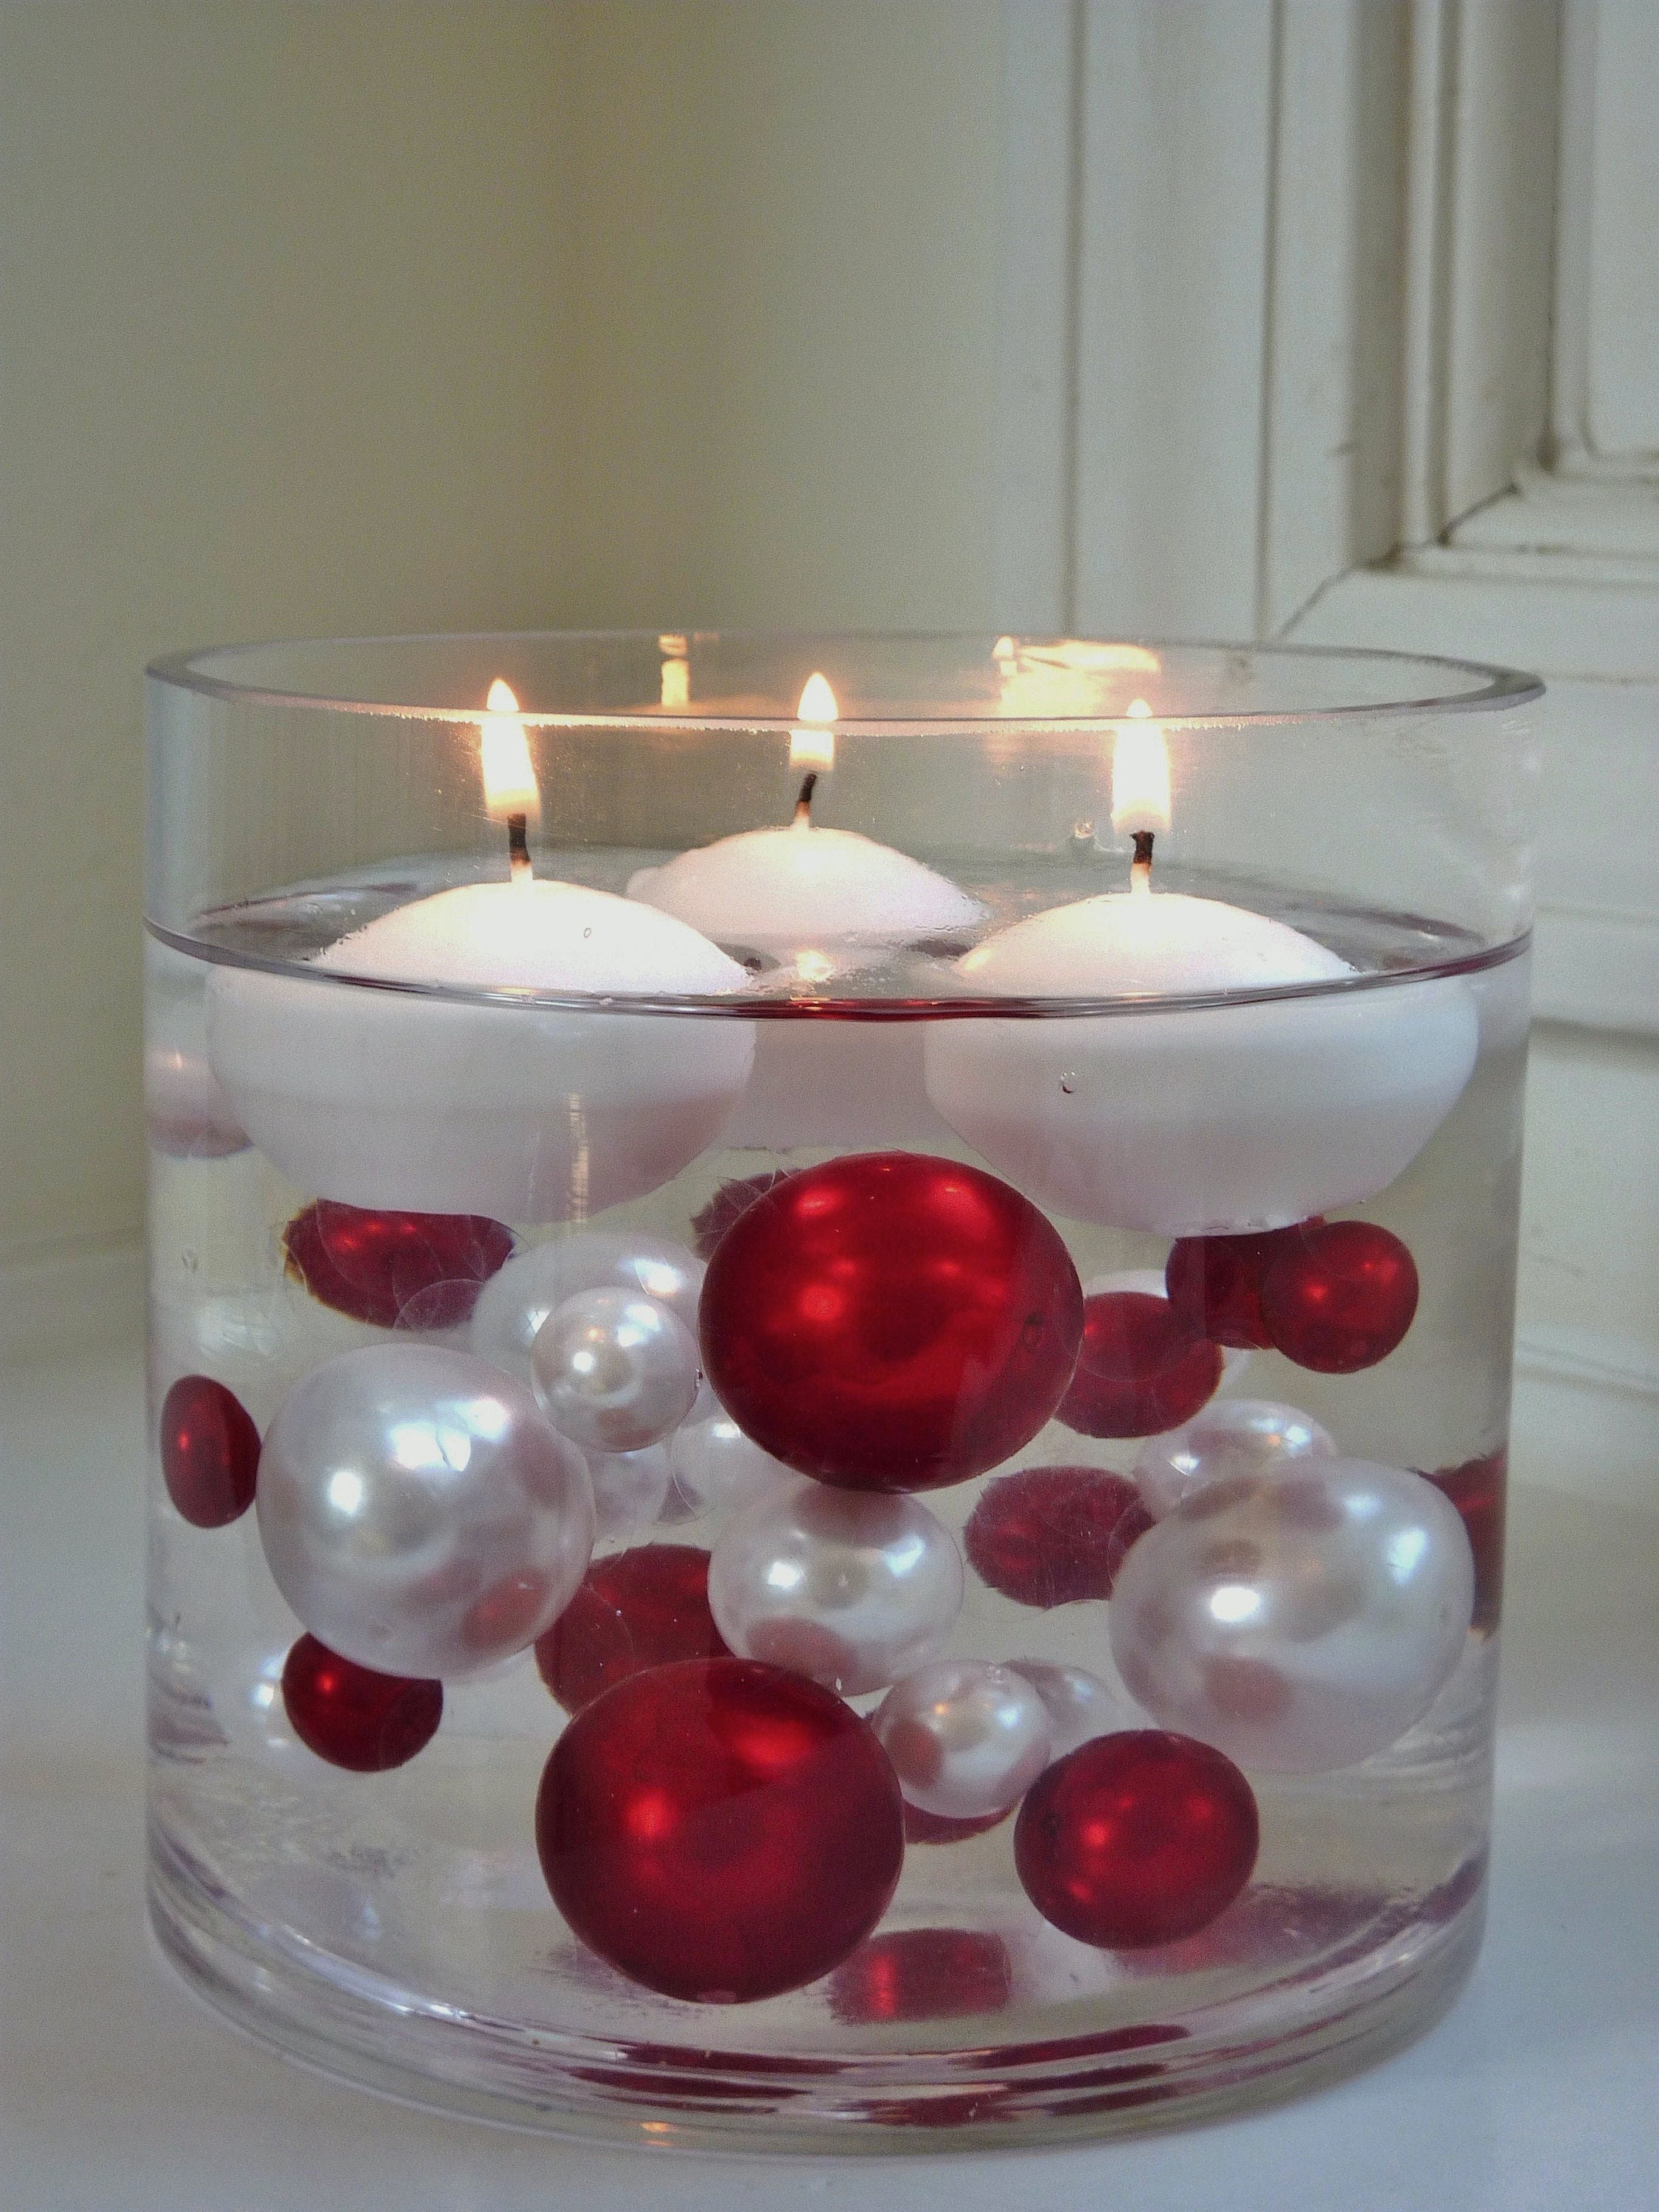 How to Make a Christmas Floating Candle